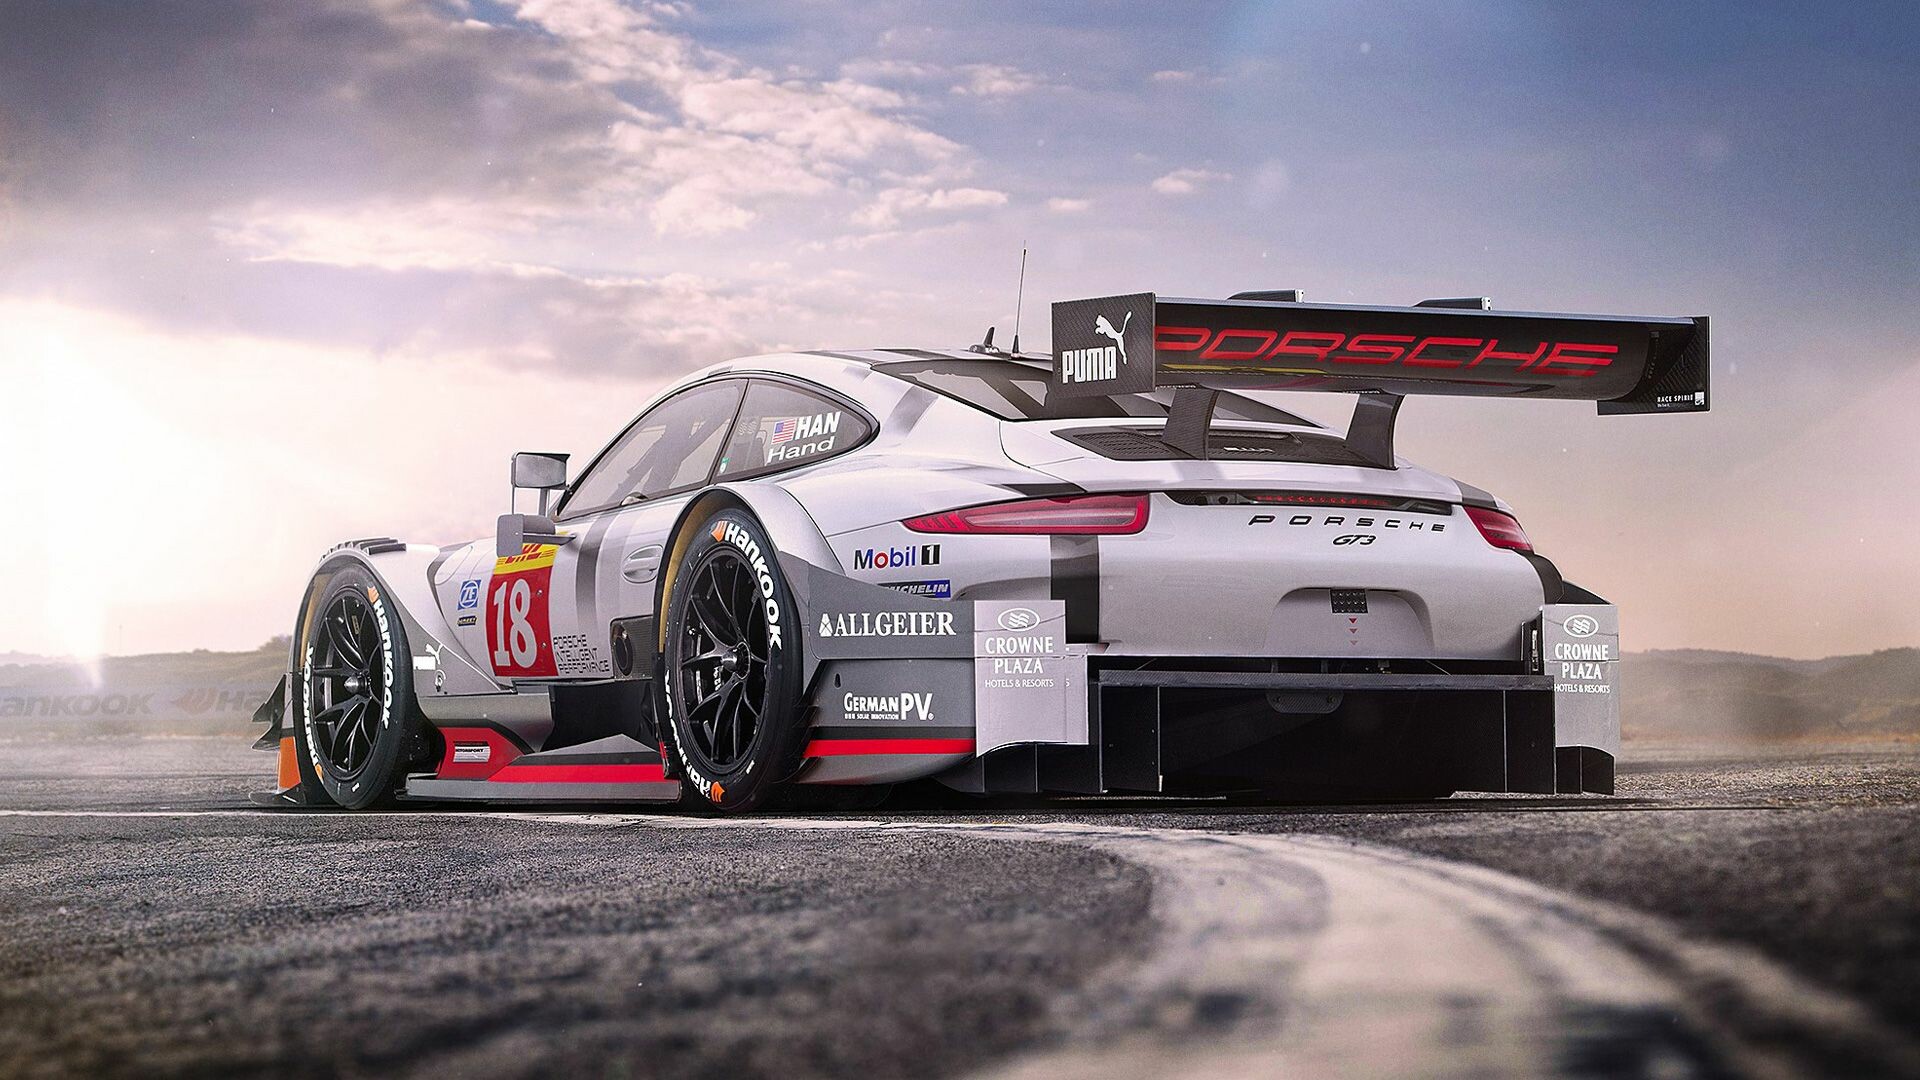 Porsche: Race car, Carrera Cup, One of the preeminent one-make racing series in the world. 1920x1080 Full HD Background.